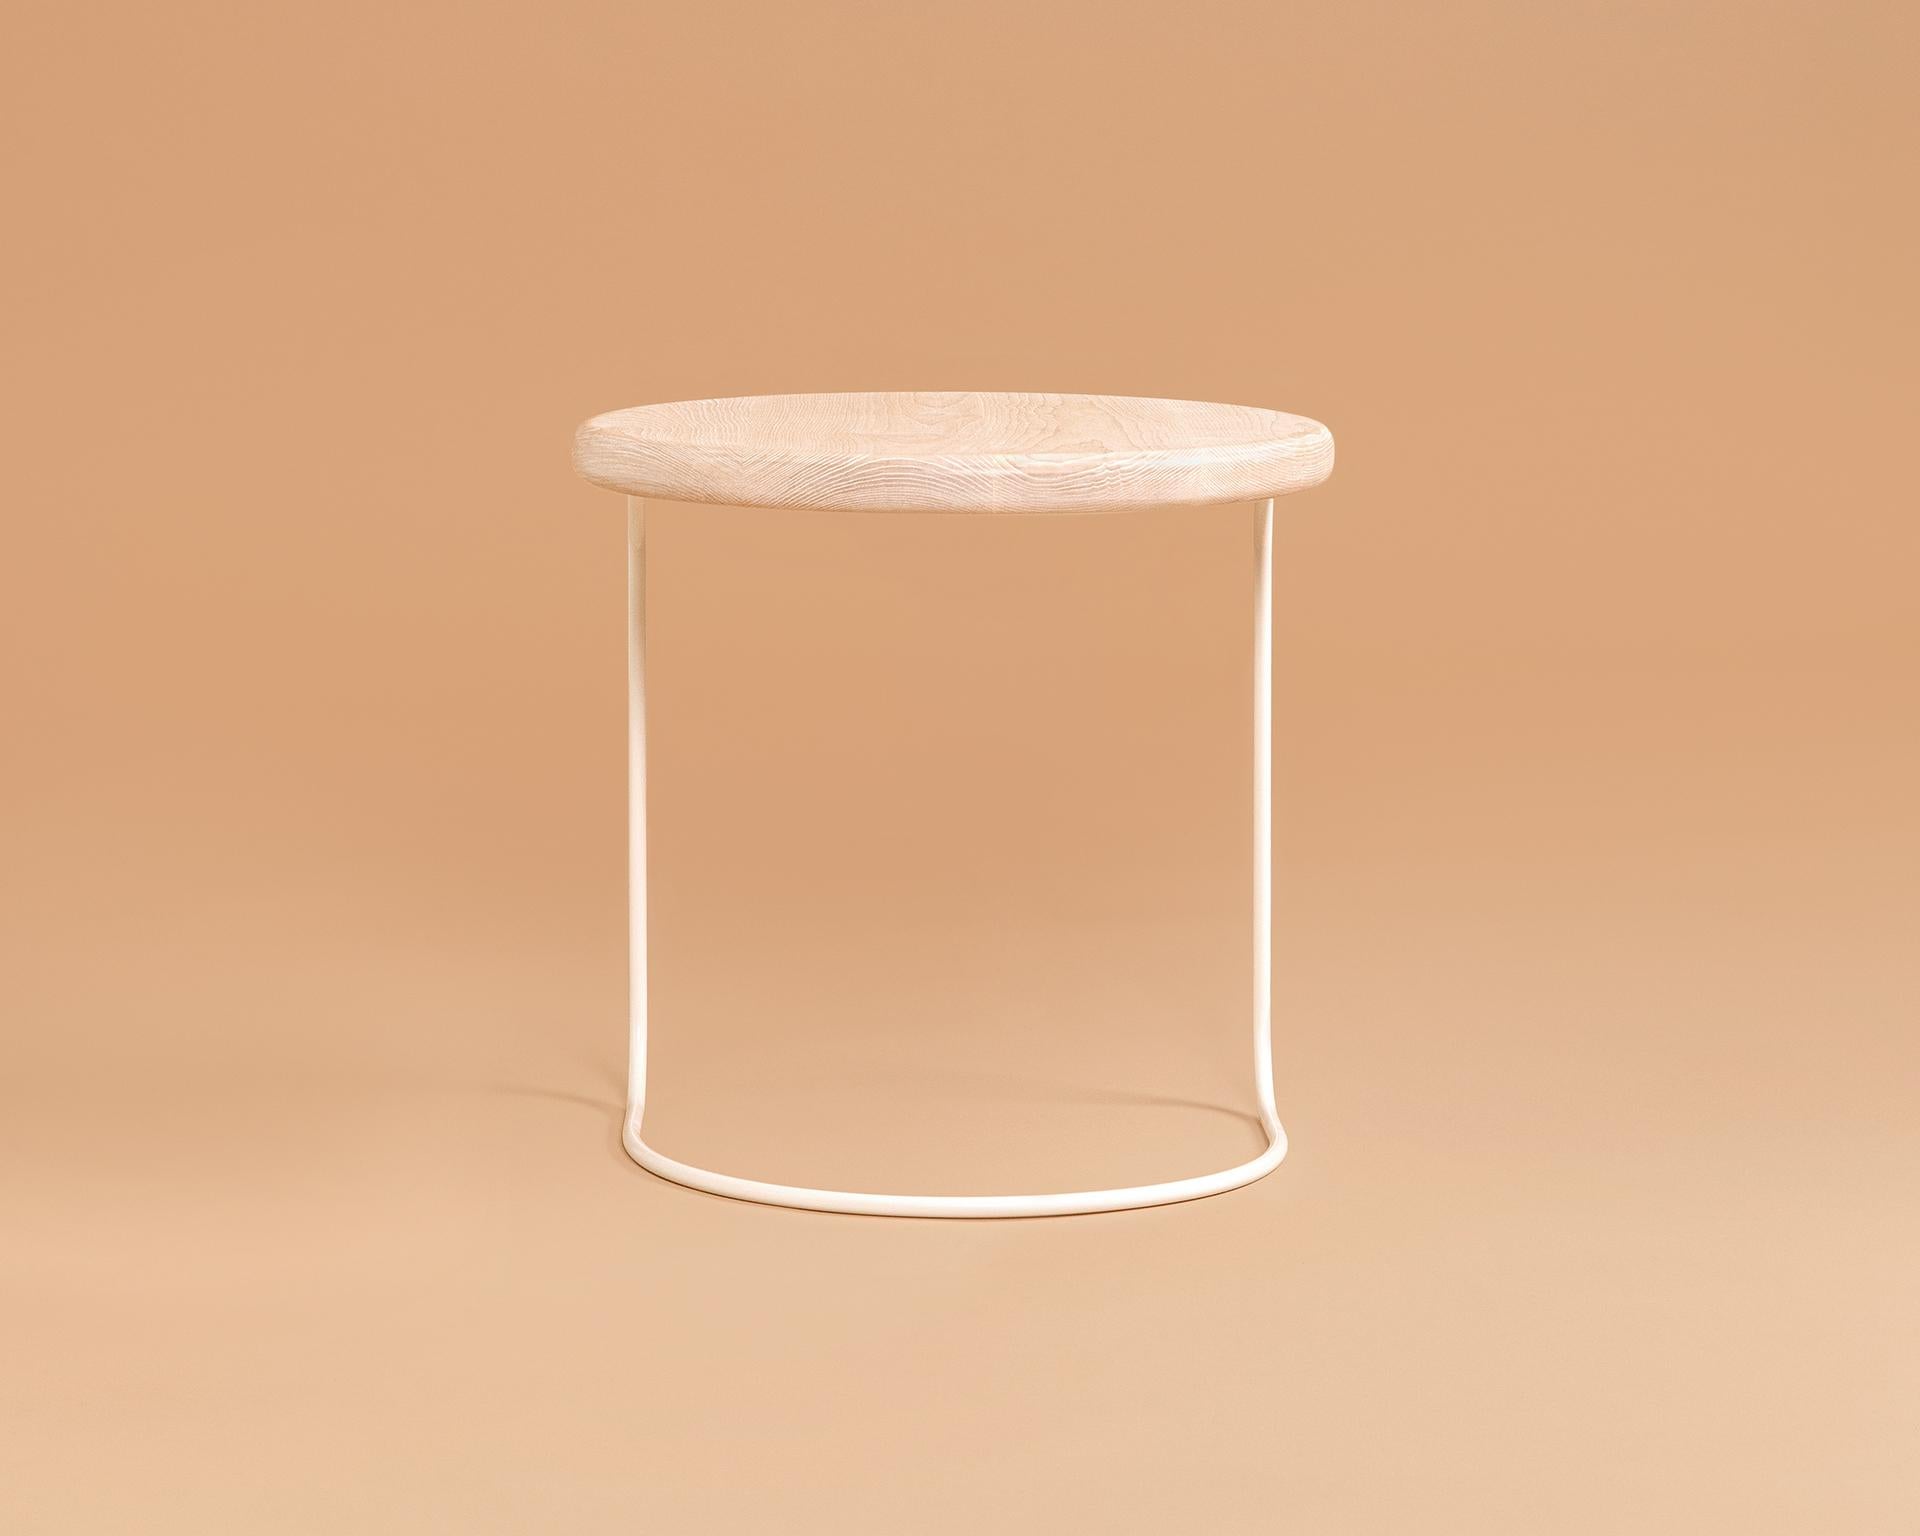 American Contemporary Wood and Metal Round Side Table